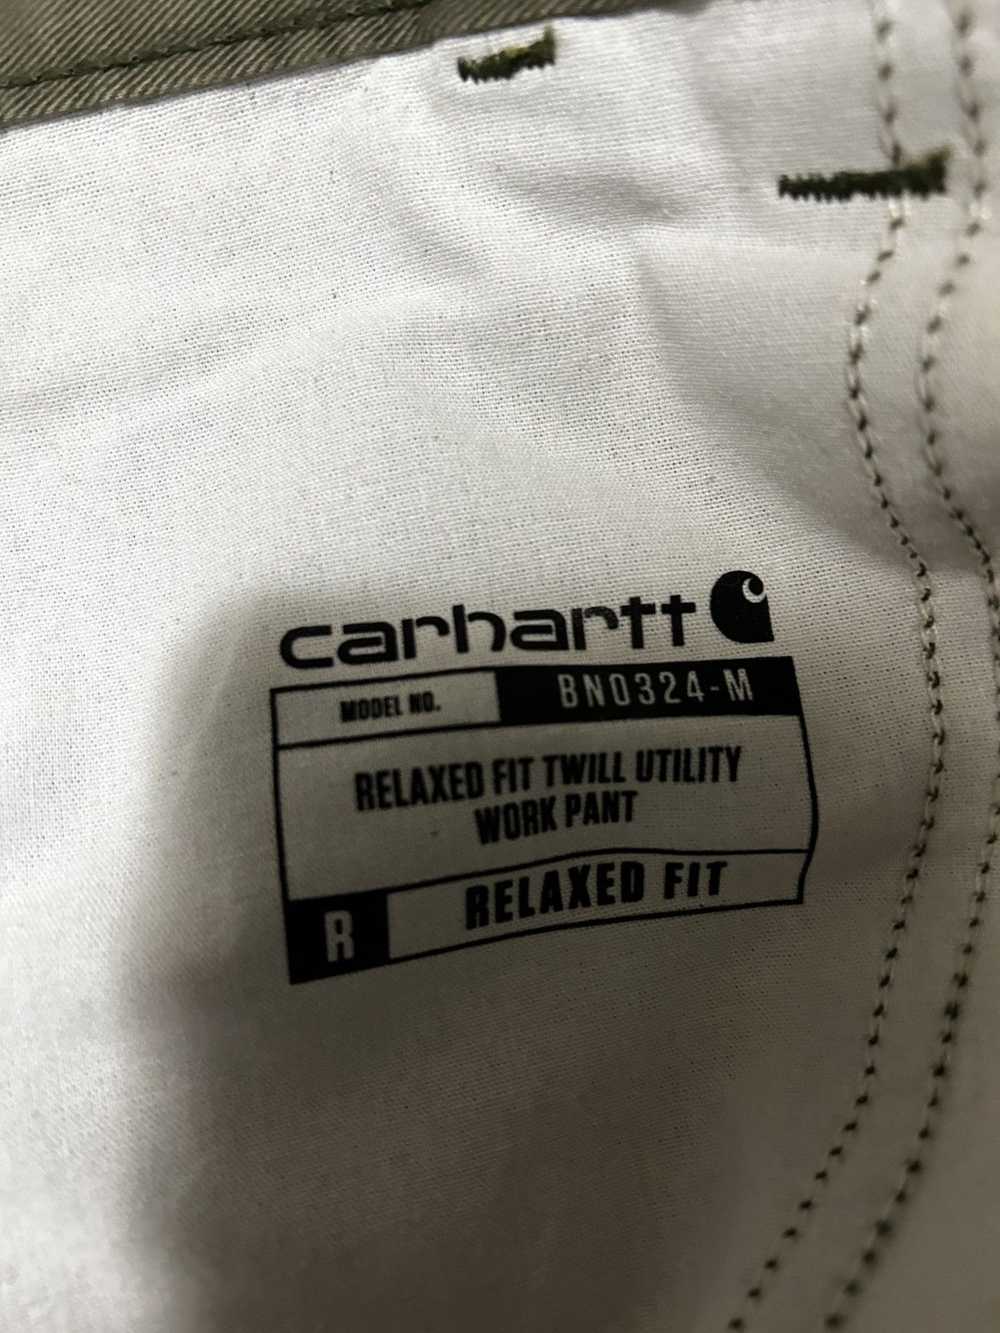 Carhartt Carhartt Work Pants Relaxed Fit 36x34 - image 4